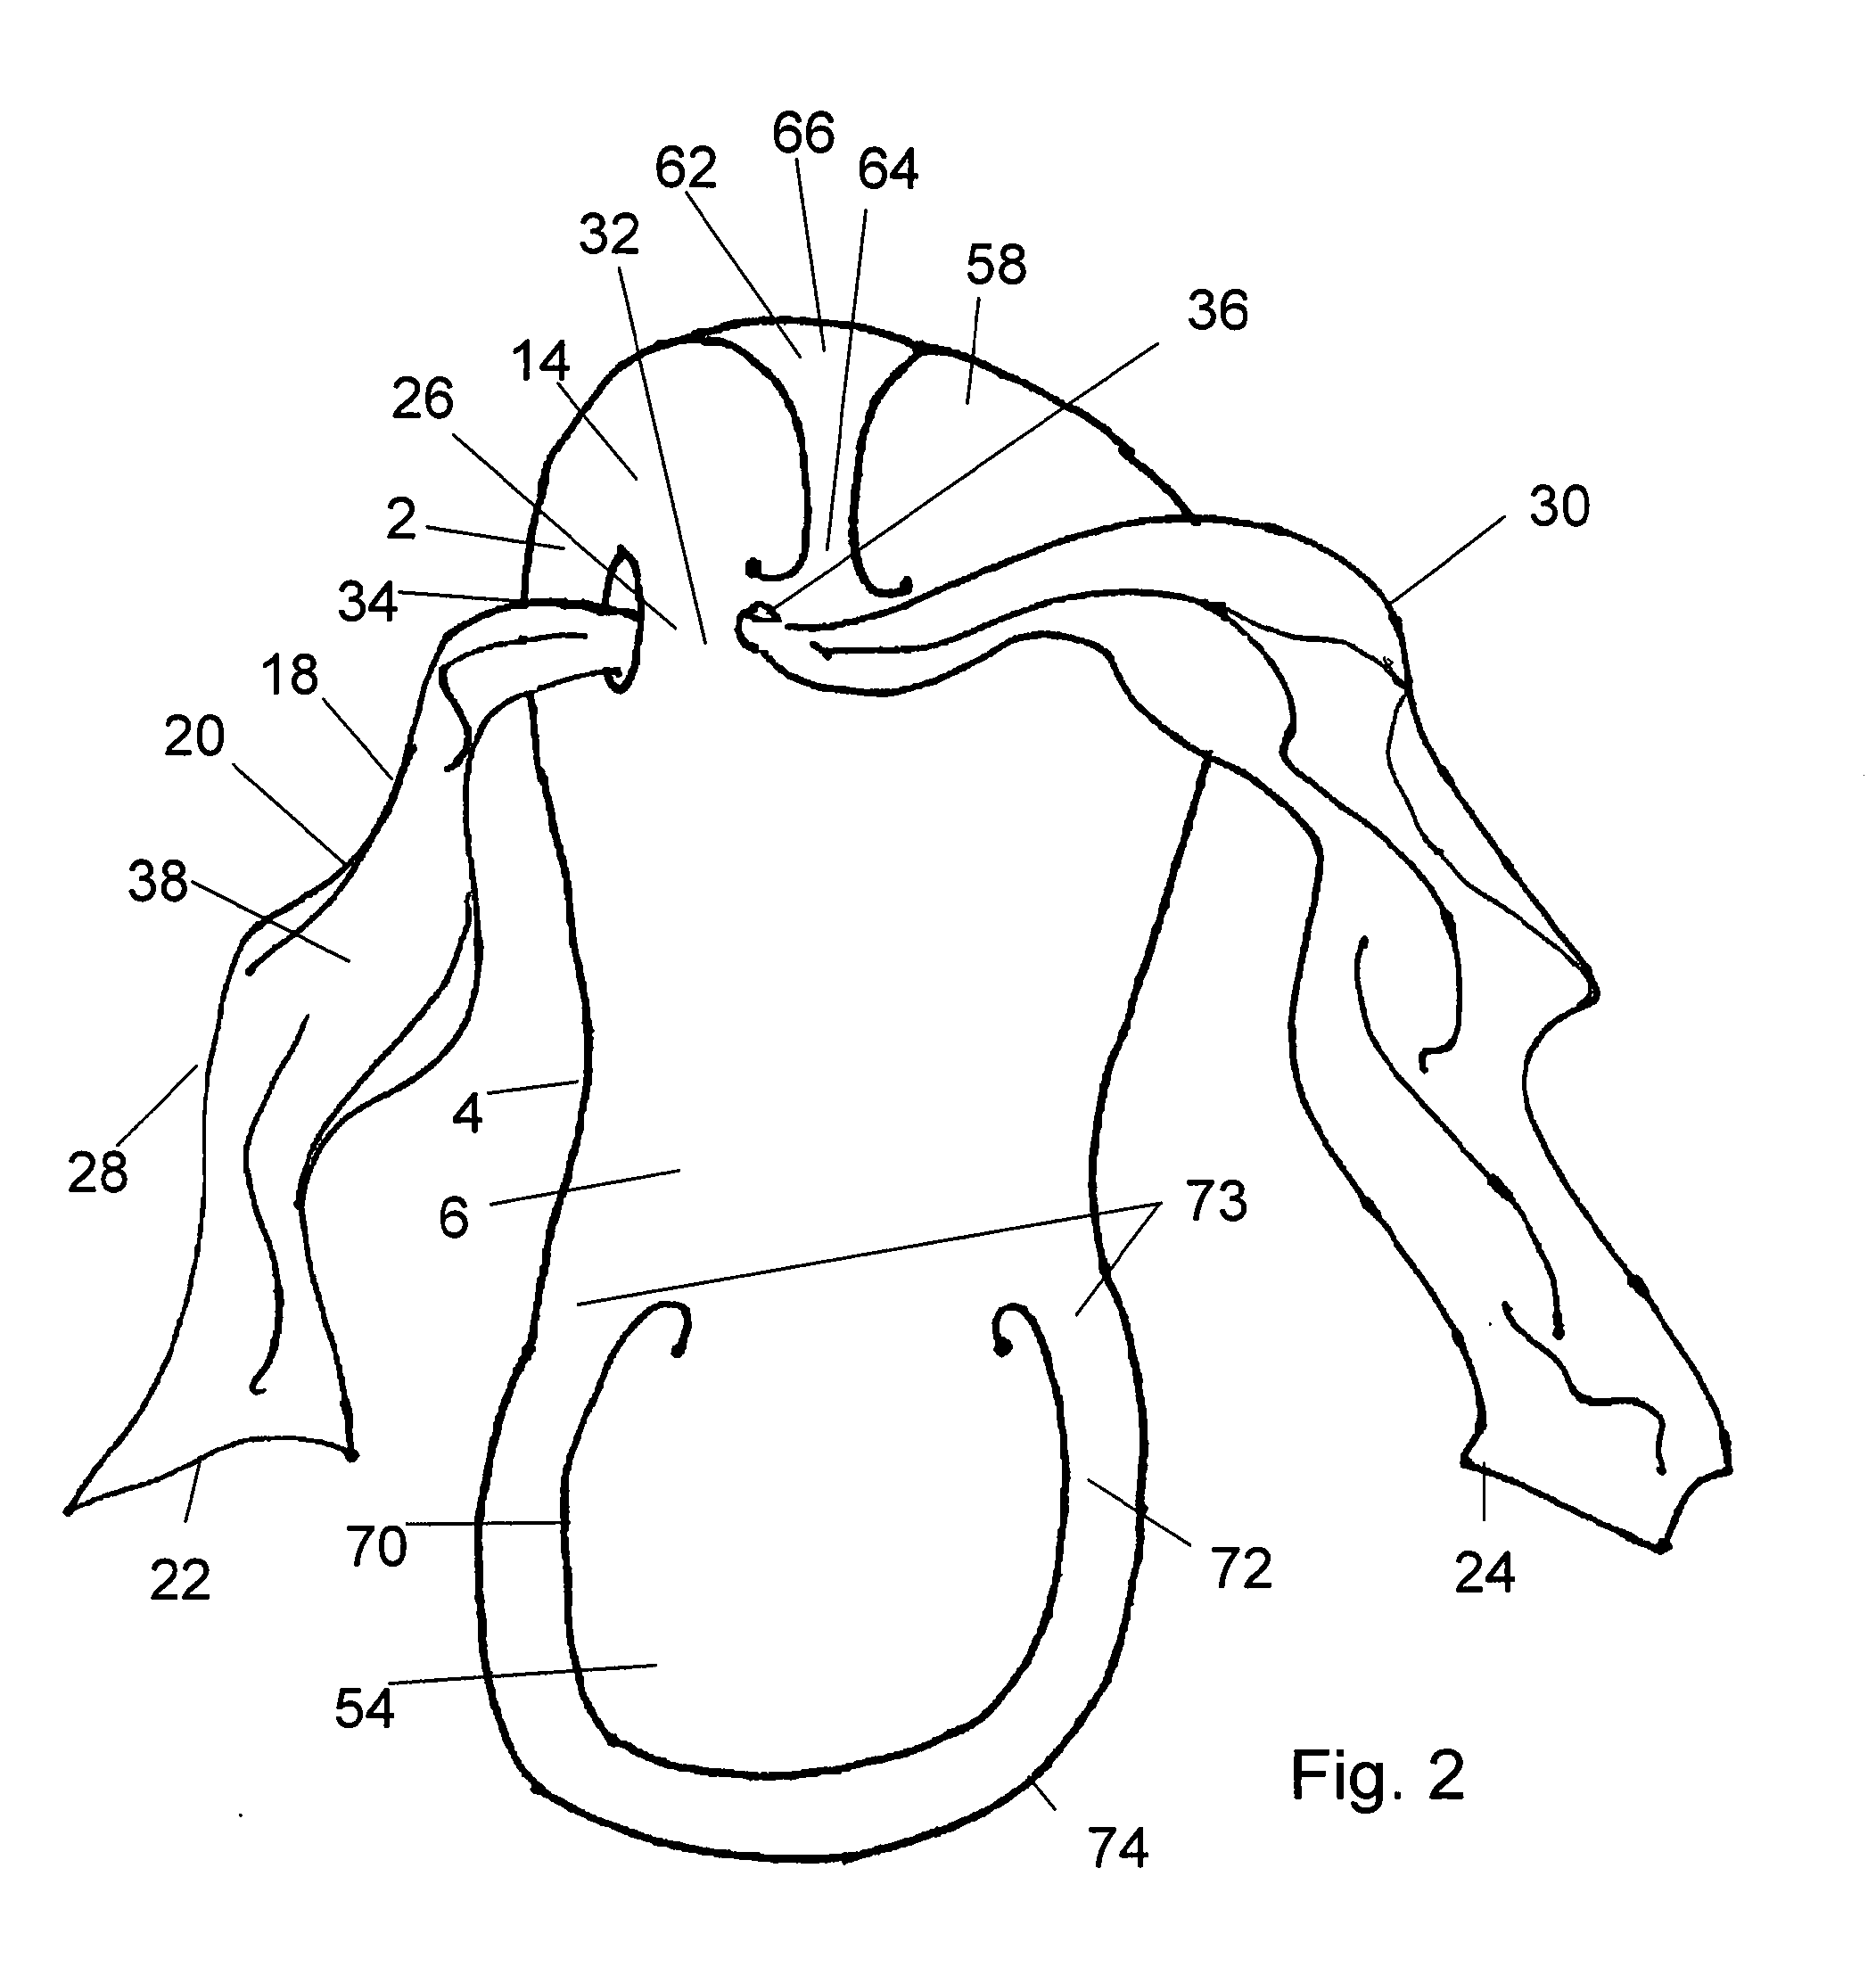 Pedicure Slipper with Toe Separator and Method